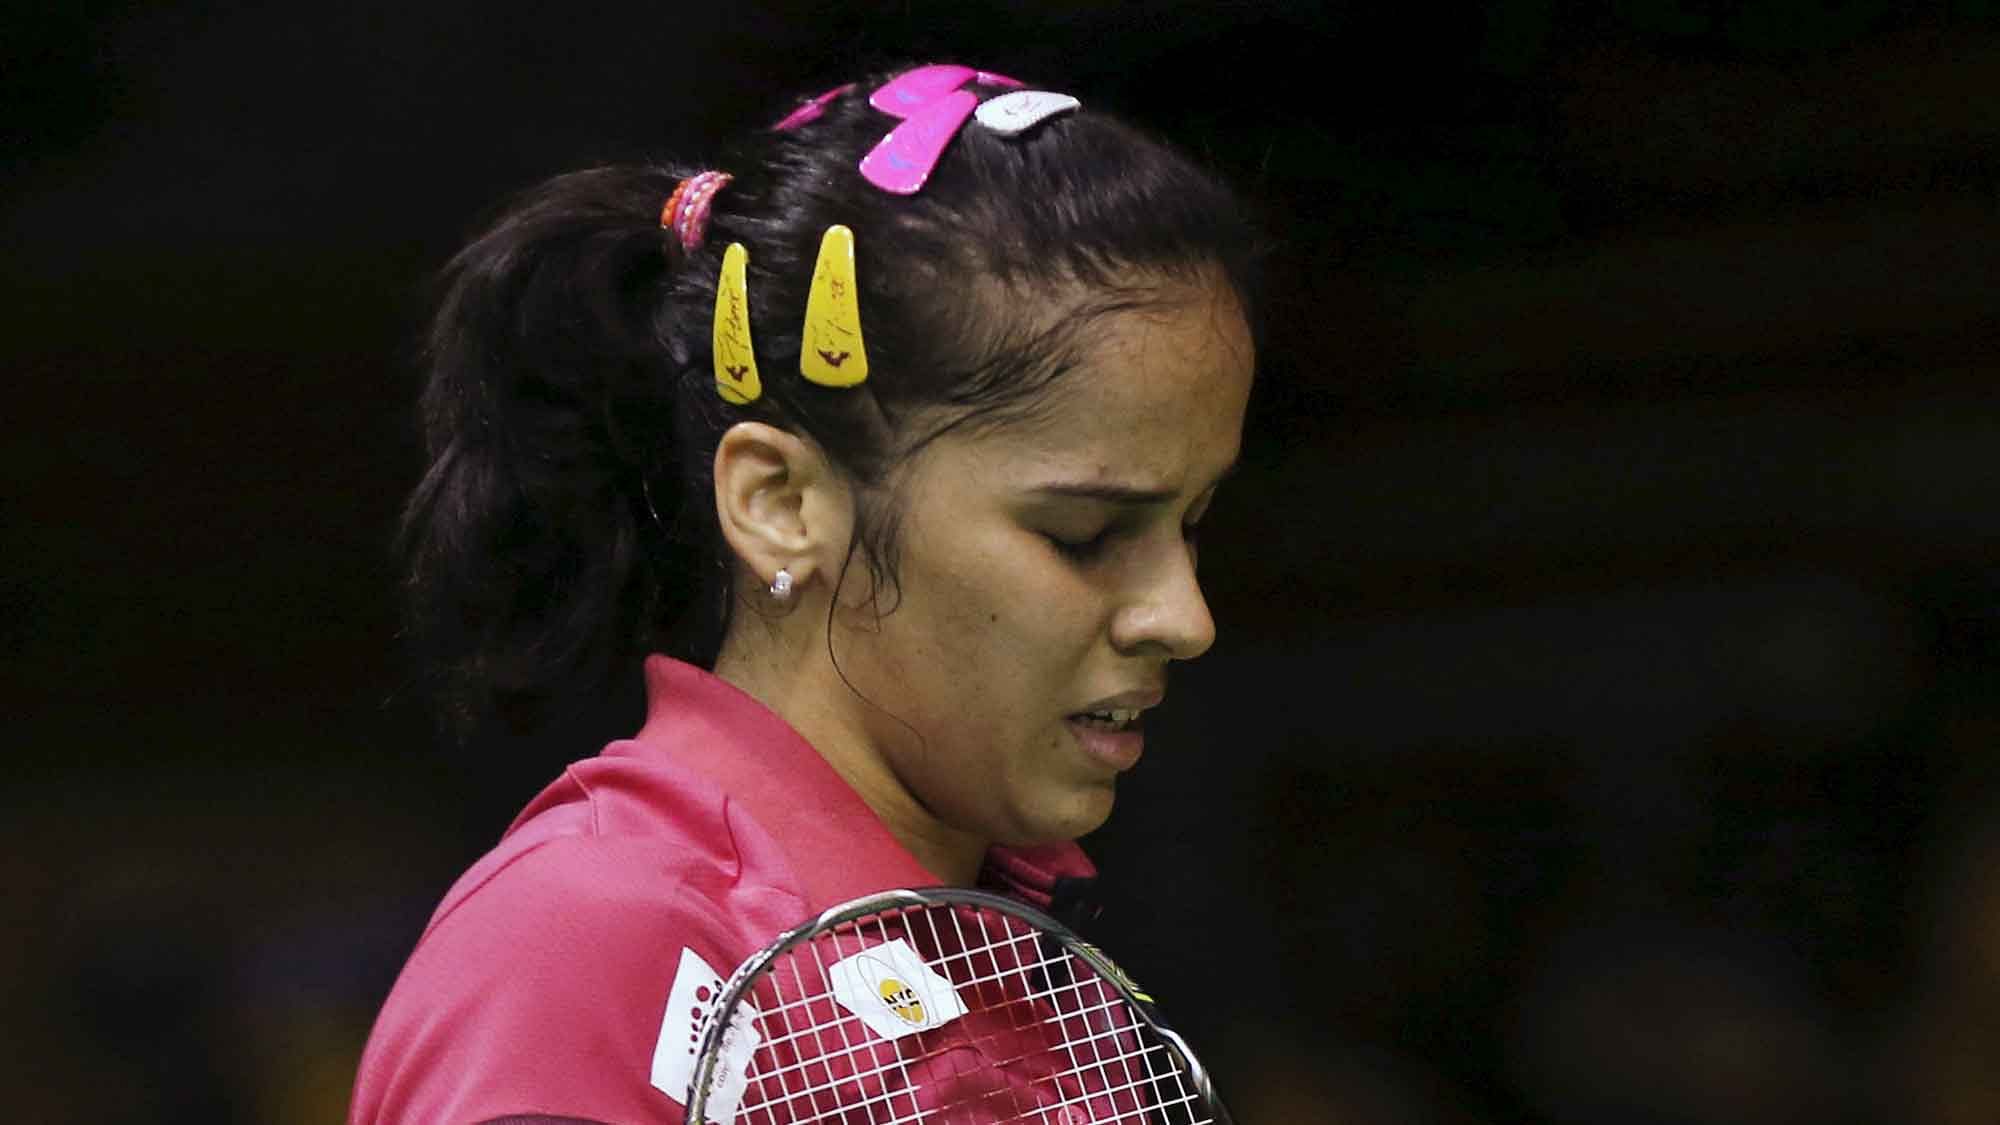 Saina Nehwal was eliminated in the preliminary rounds due to an injury she was carrying.